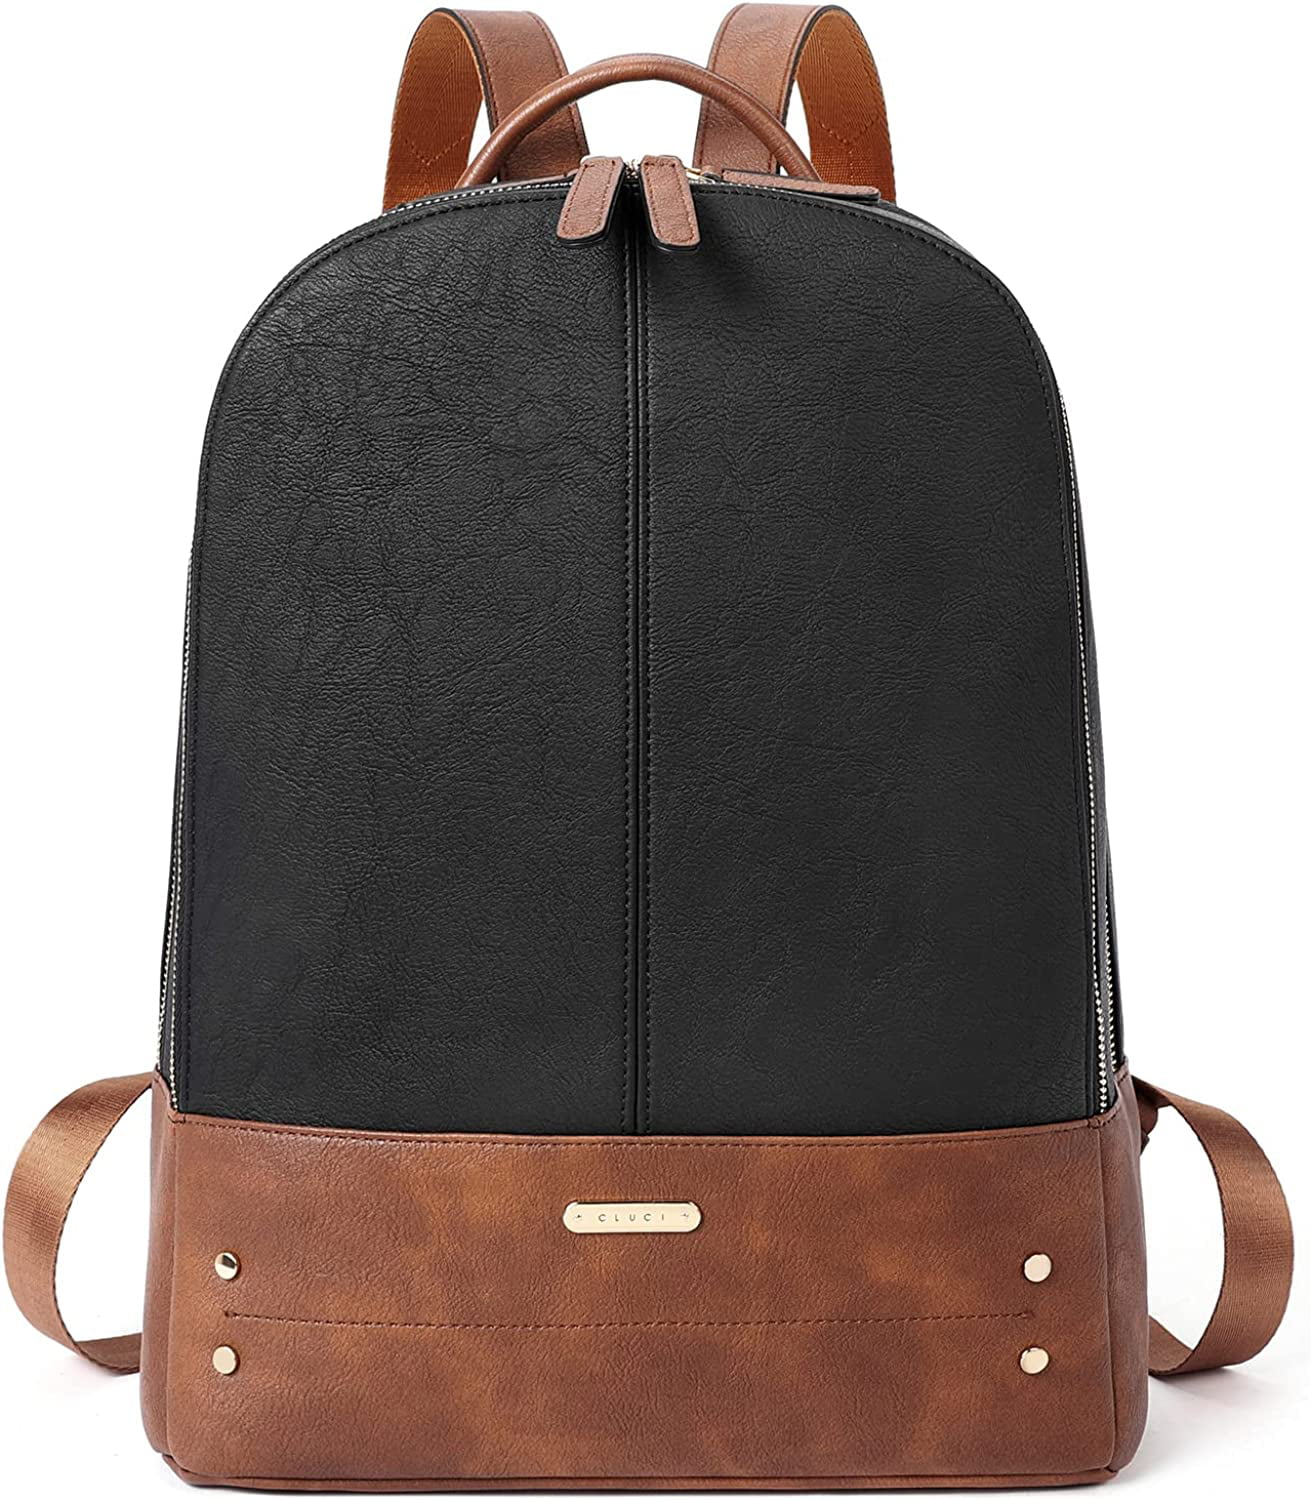 Laptop Backpack for Women Leather 15.6 inch Computer Backpack